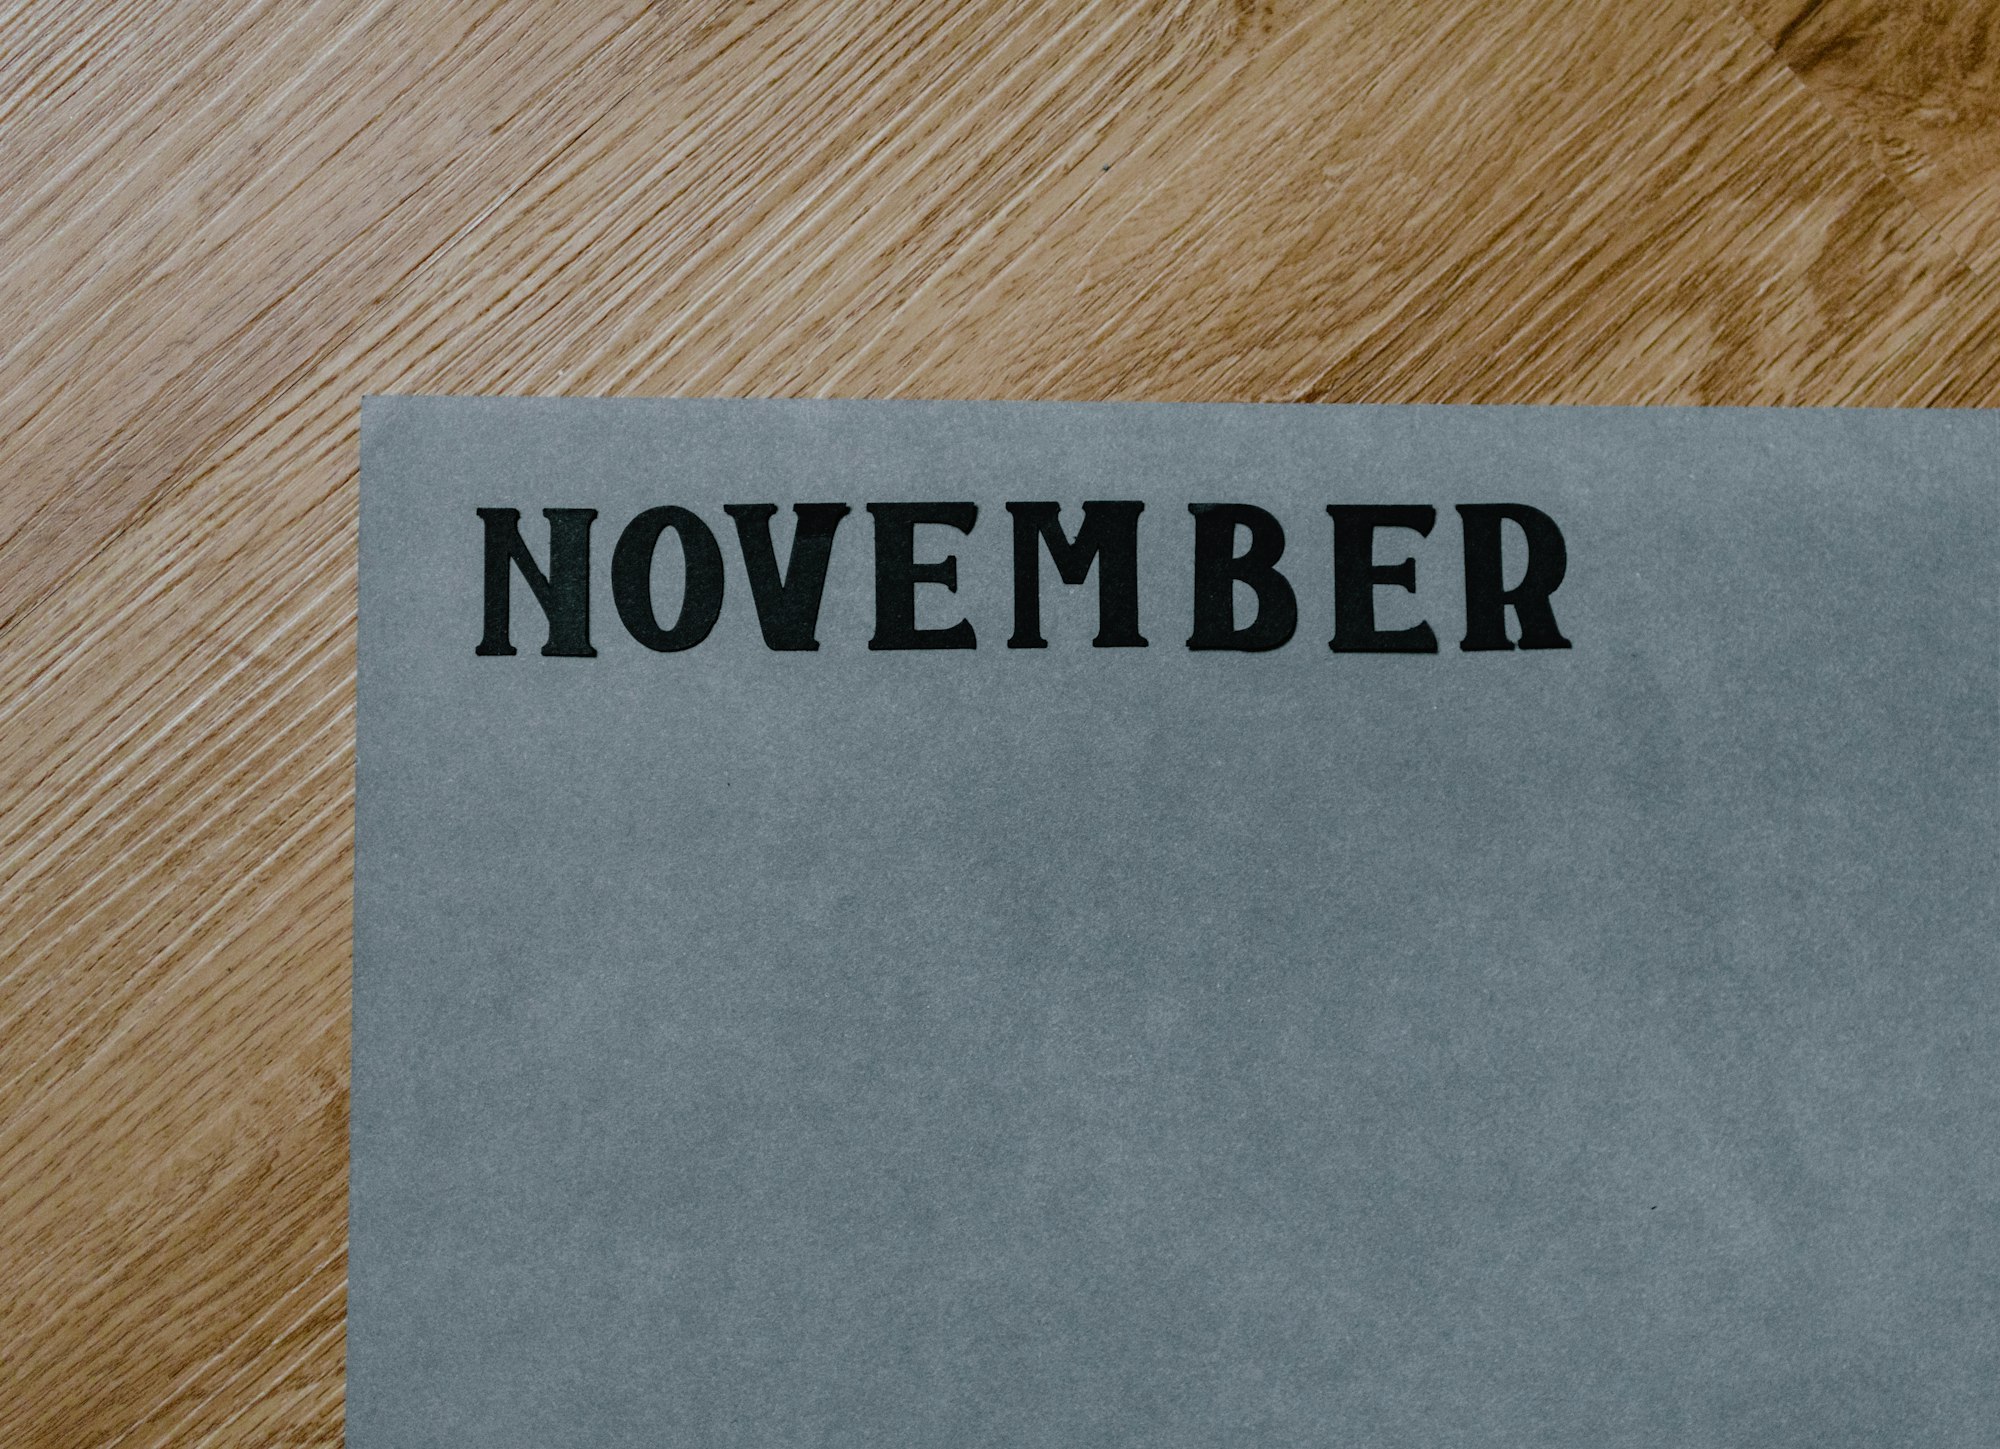 More November Things to Know